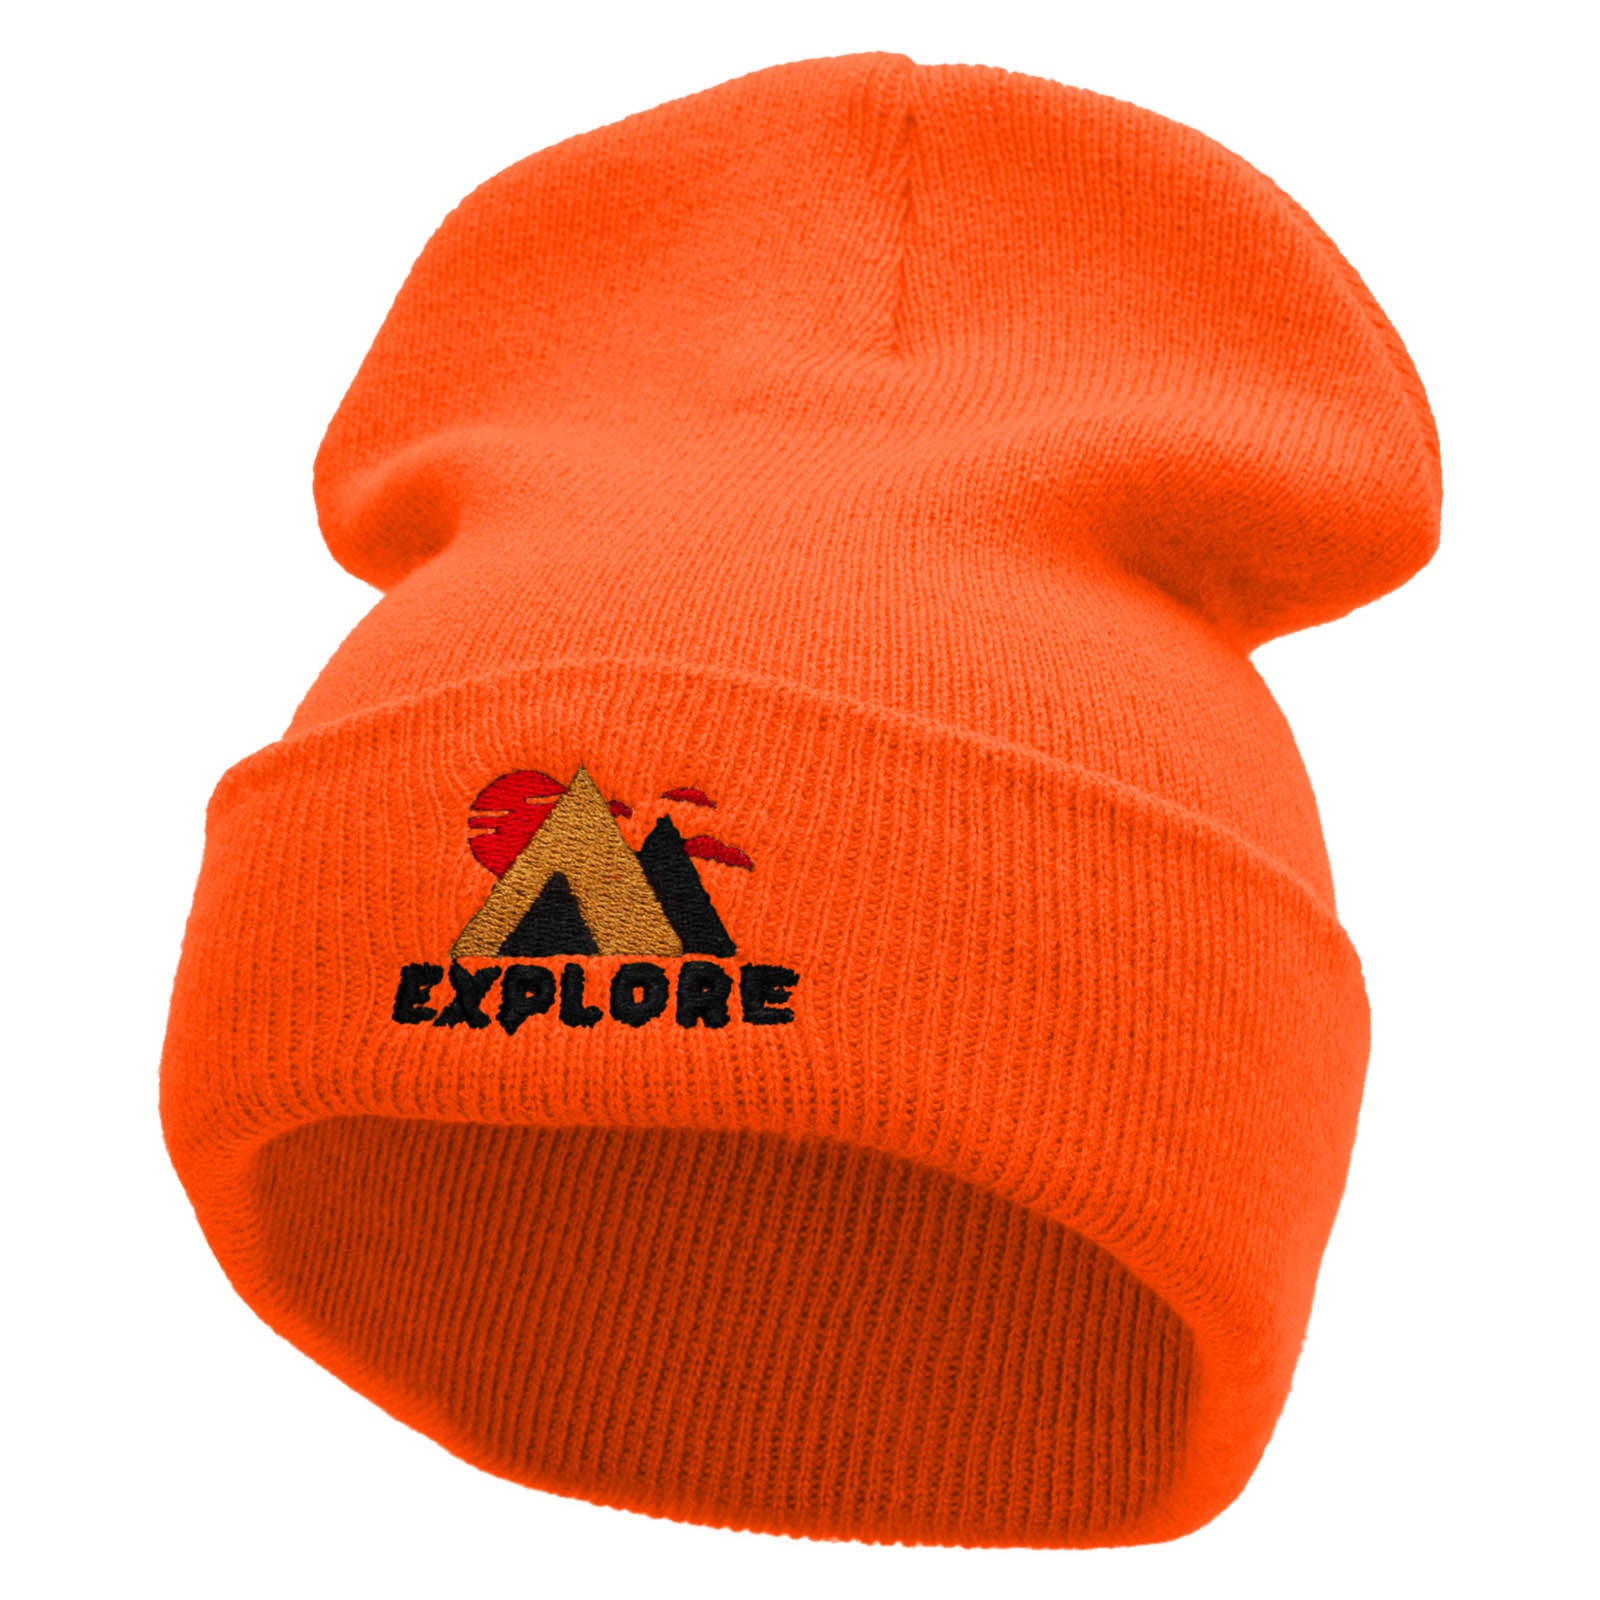 Explore Embroidered 12 Inch Solid Long Beanie Made in USA - Neon Orange OSFM